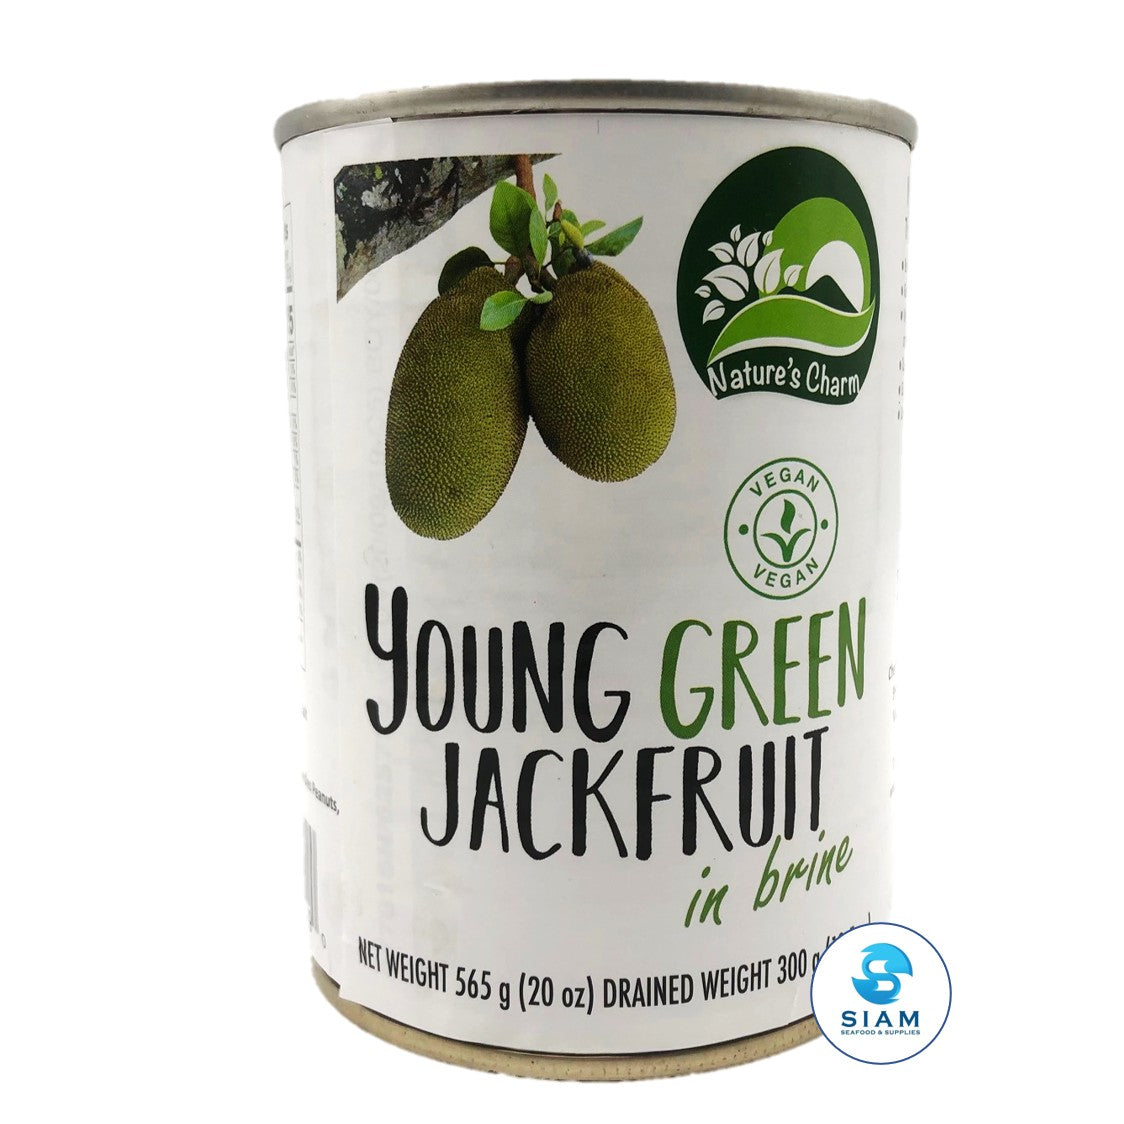 Young Green Jackfruit in Brine, Vegan - Nature's Charm (10.5 oz-Net Wt 22.7 oz)  shippable Nature's Charm